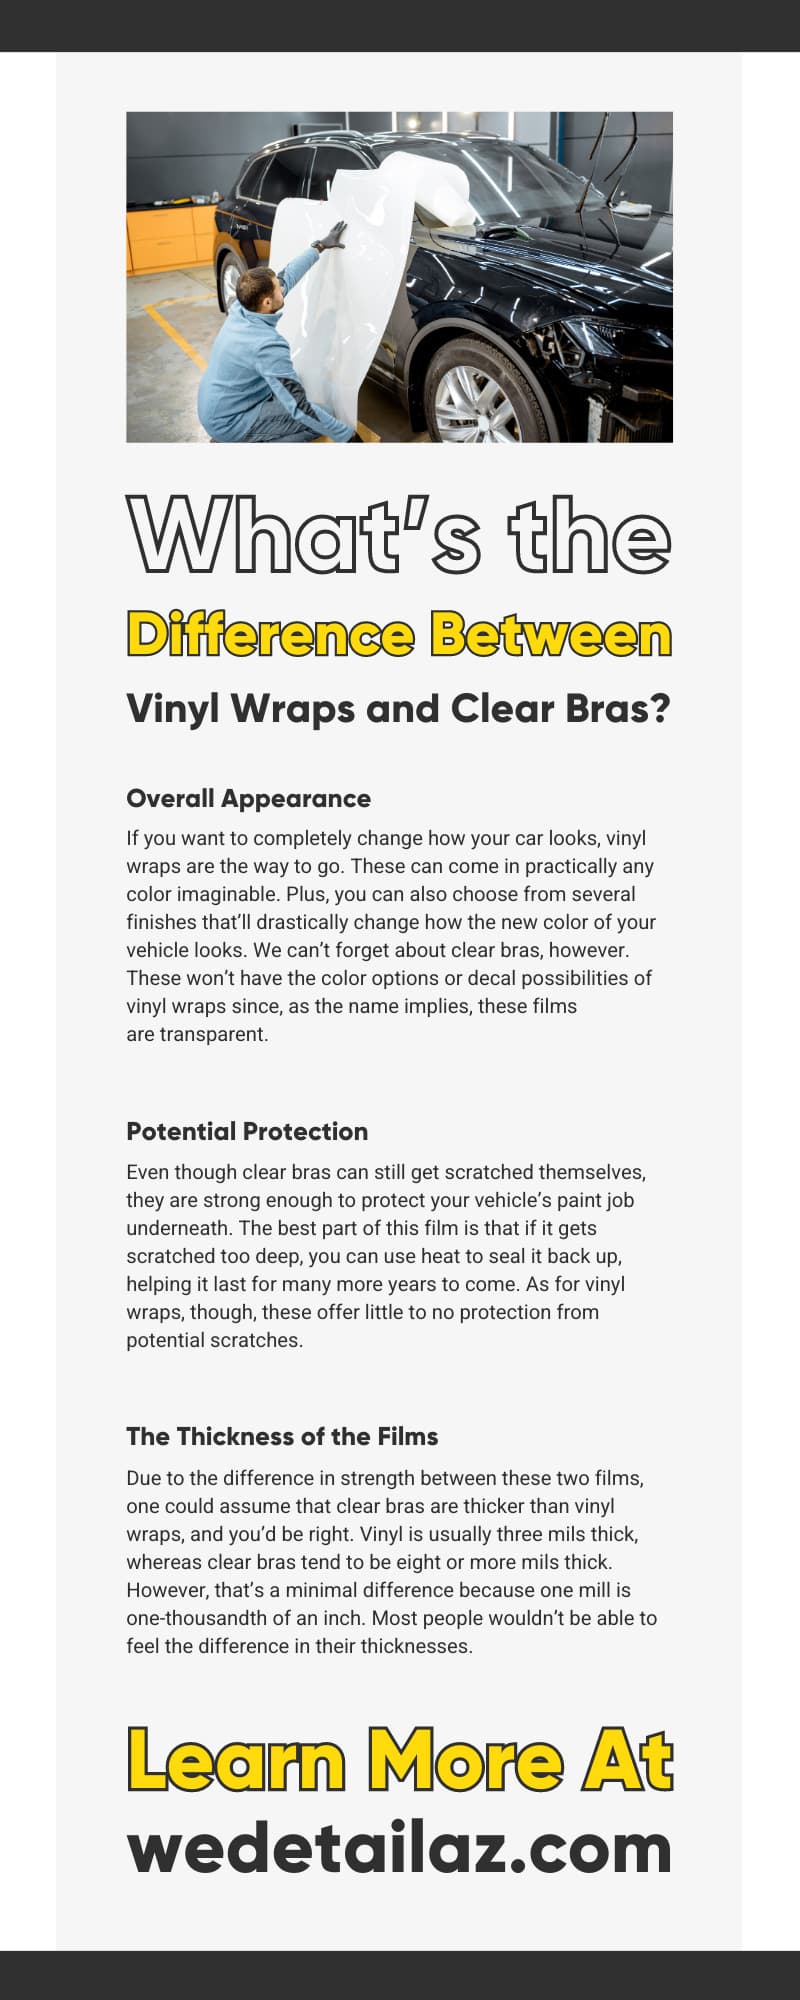 What’s the Difference Between Vinyl Wraps and Clear Bras?